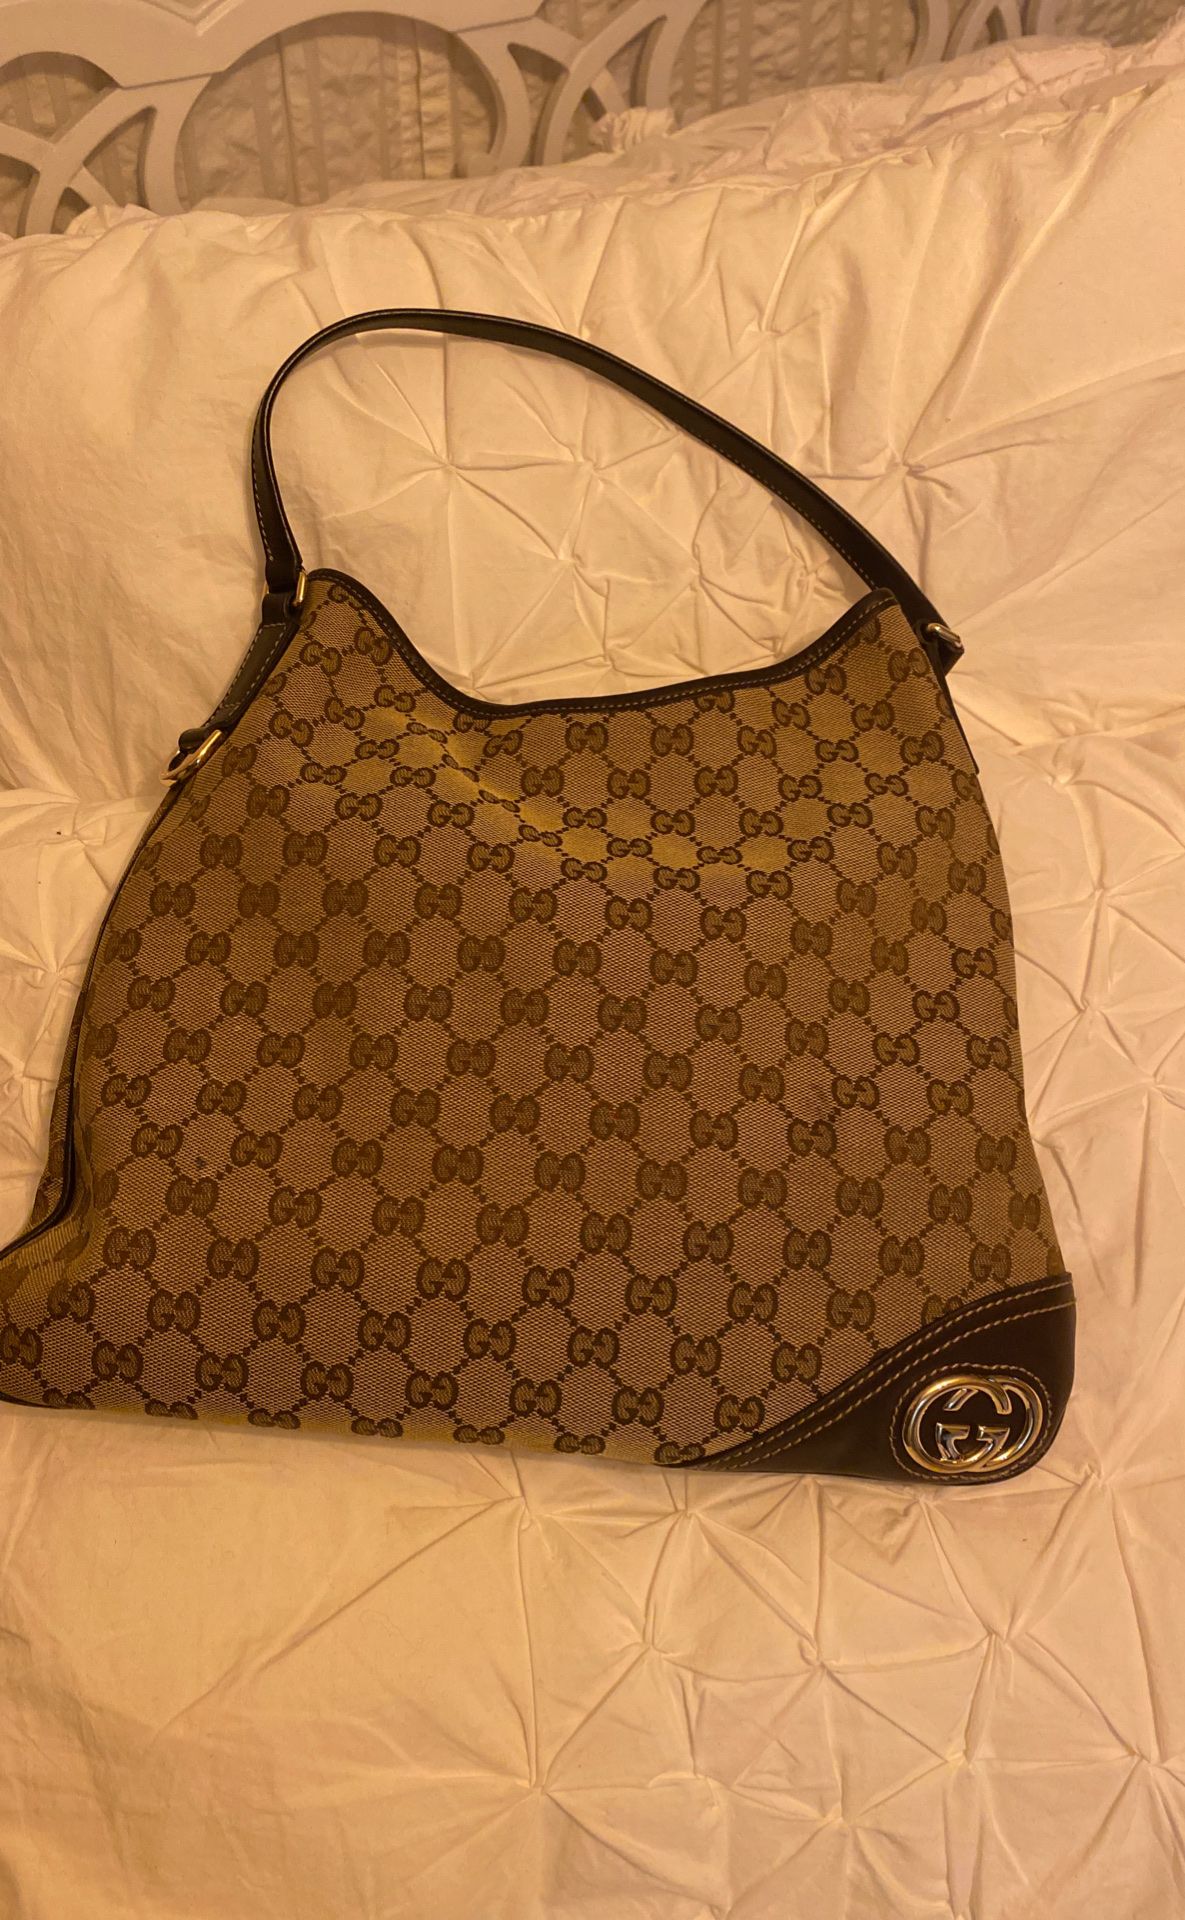 Gucci hand bag authentic guarantied!